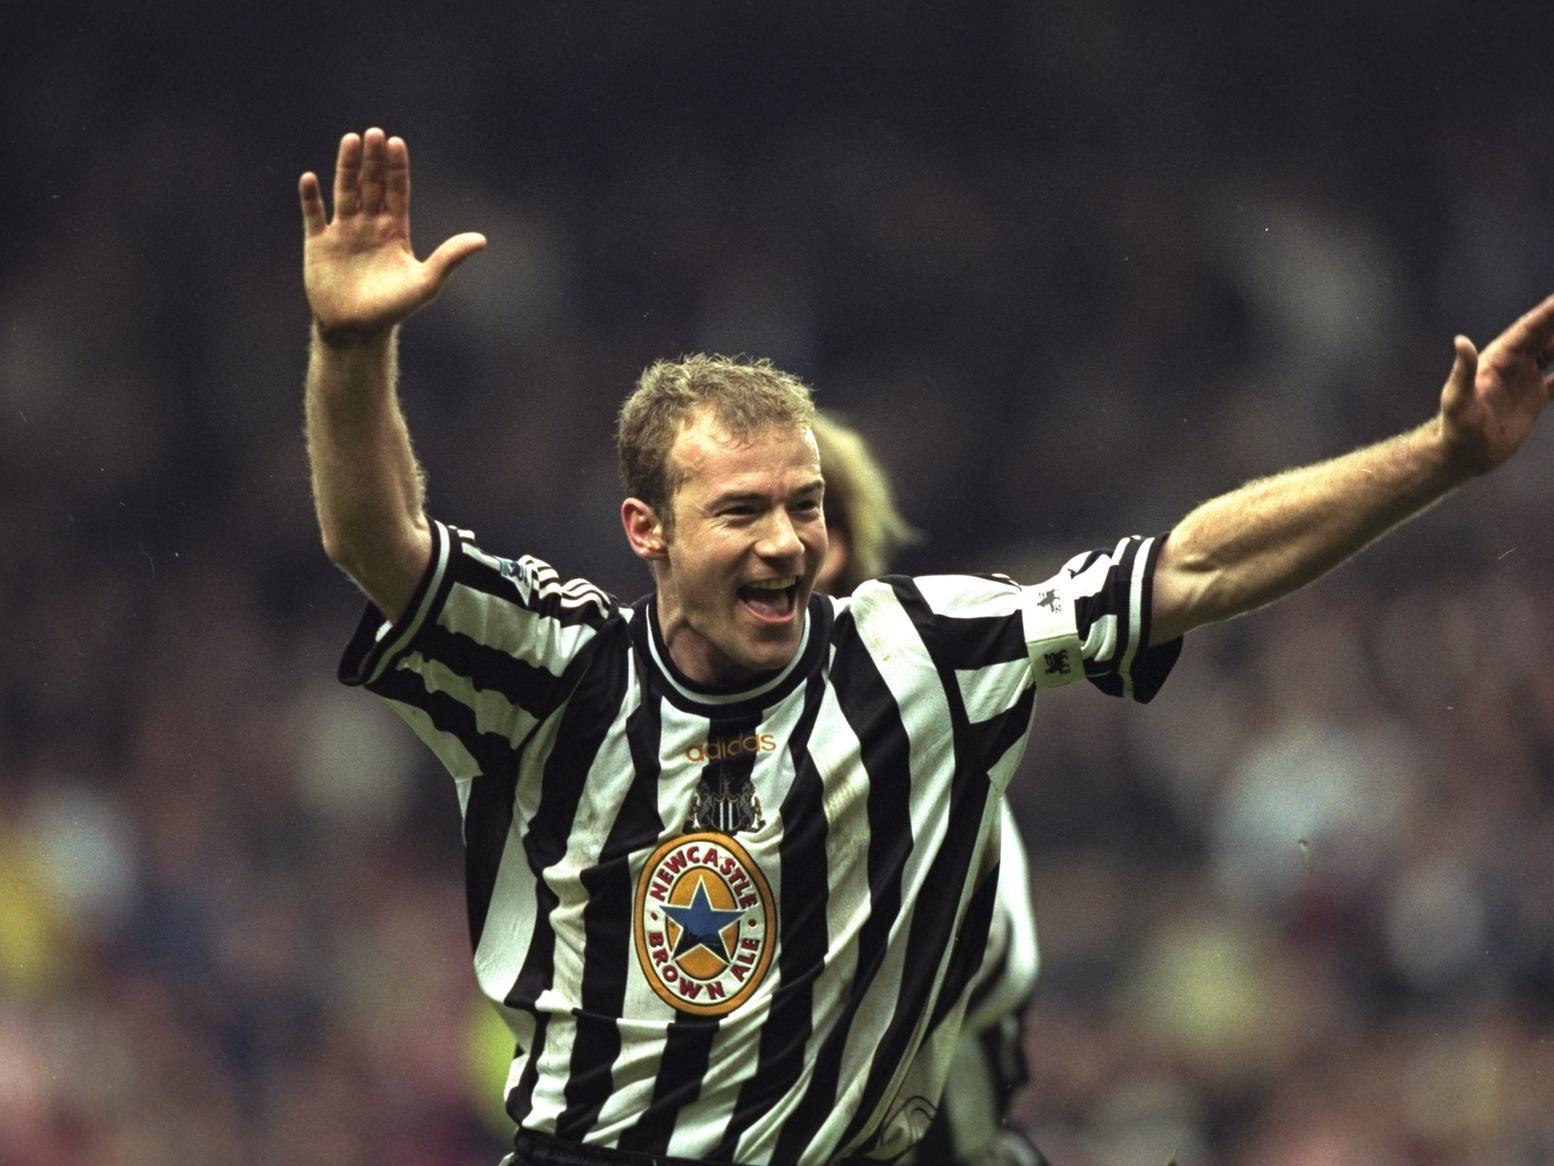 The division's all-time top goalscorer has to make the cut, surely? He won the league title with Blackburn Rovers, before going on to become a Newcastle United legend.